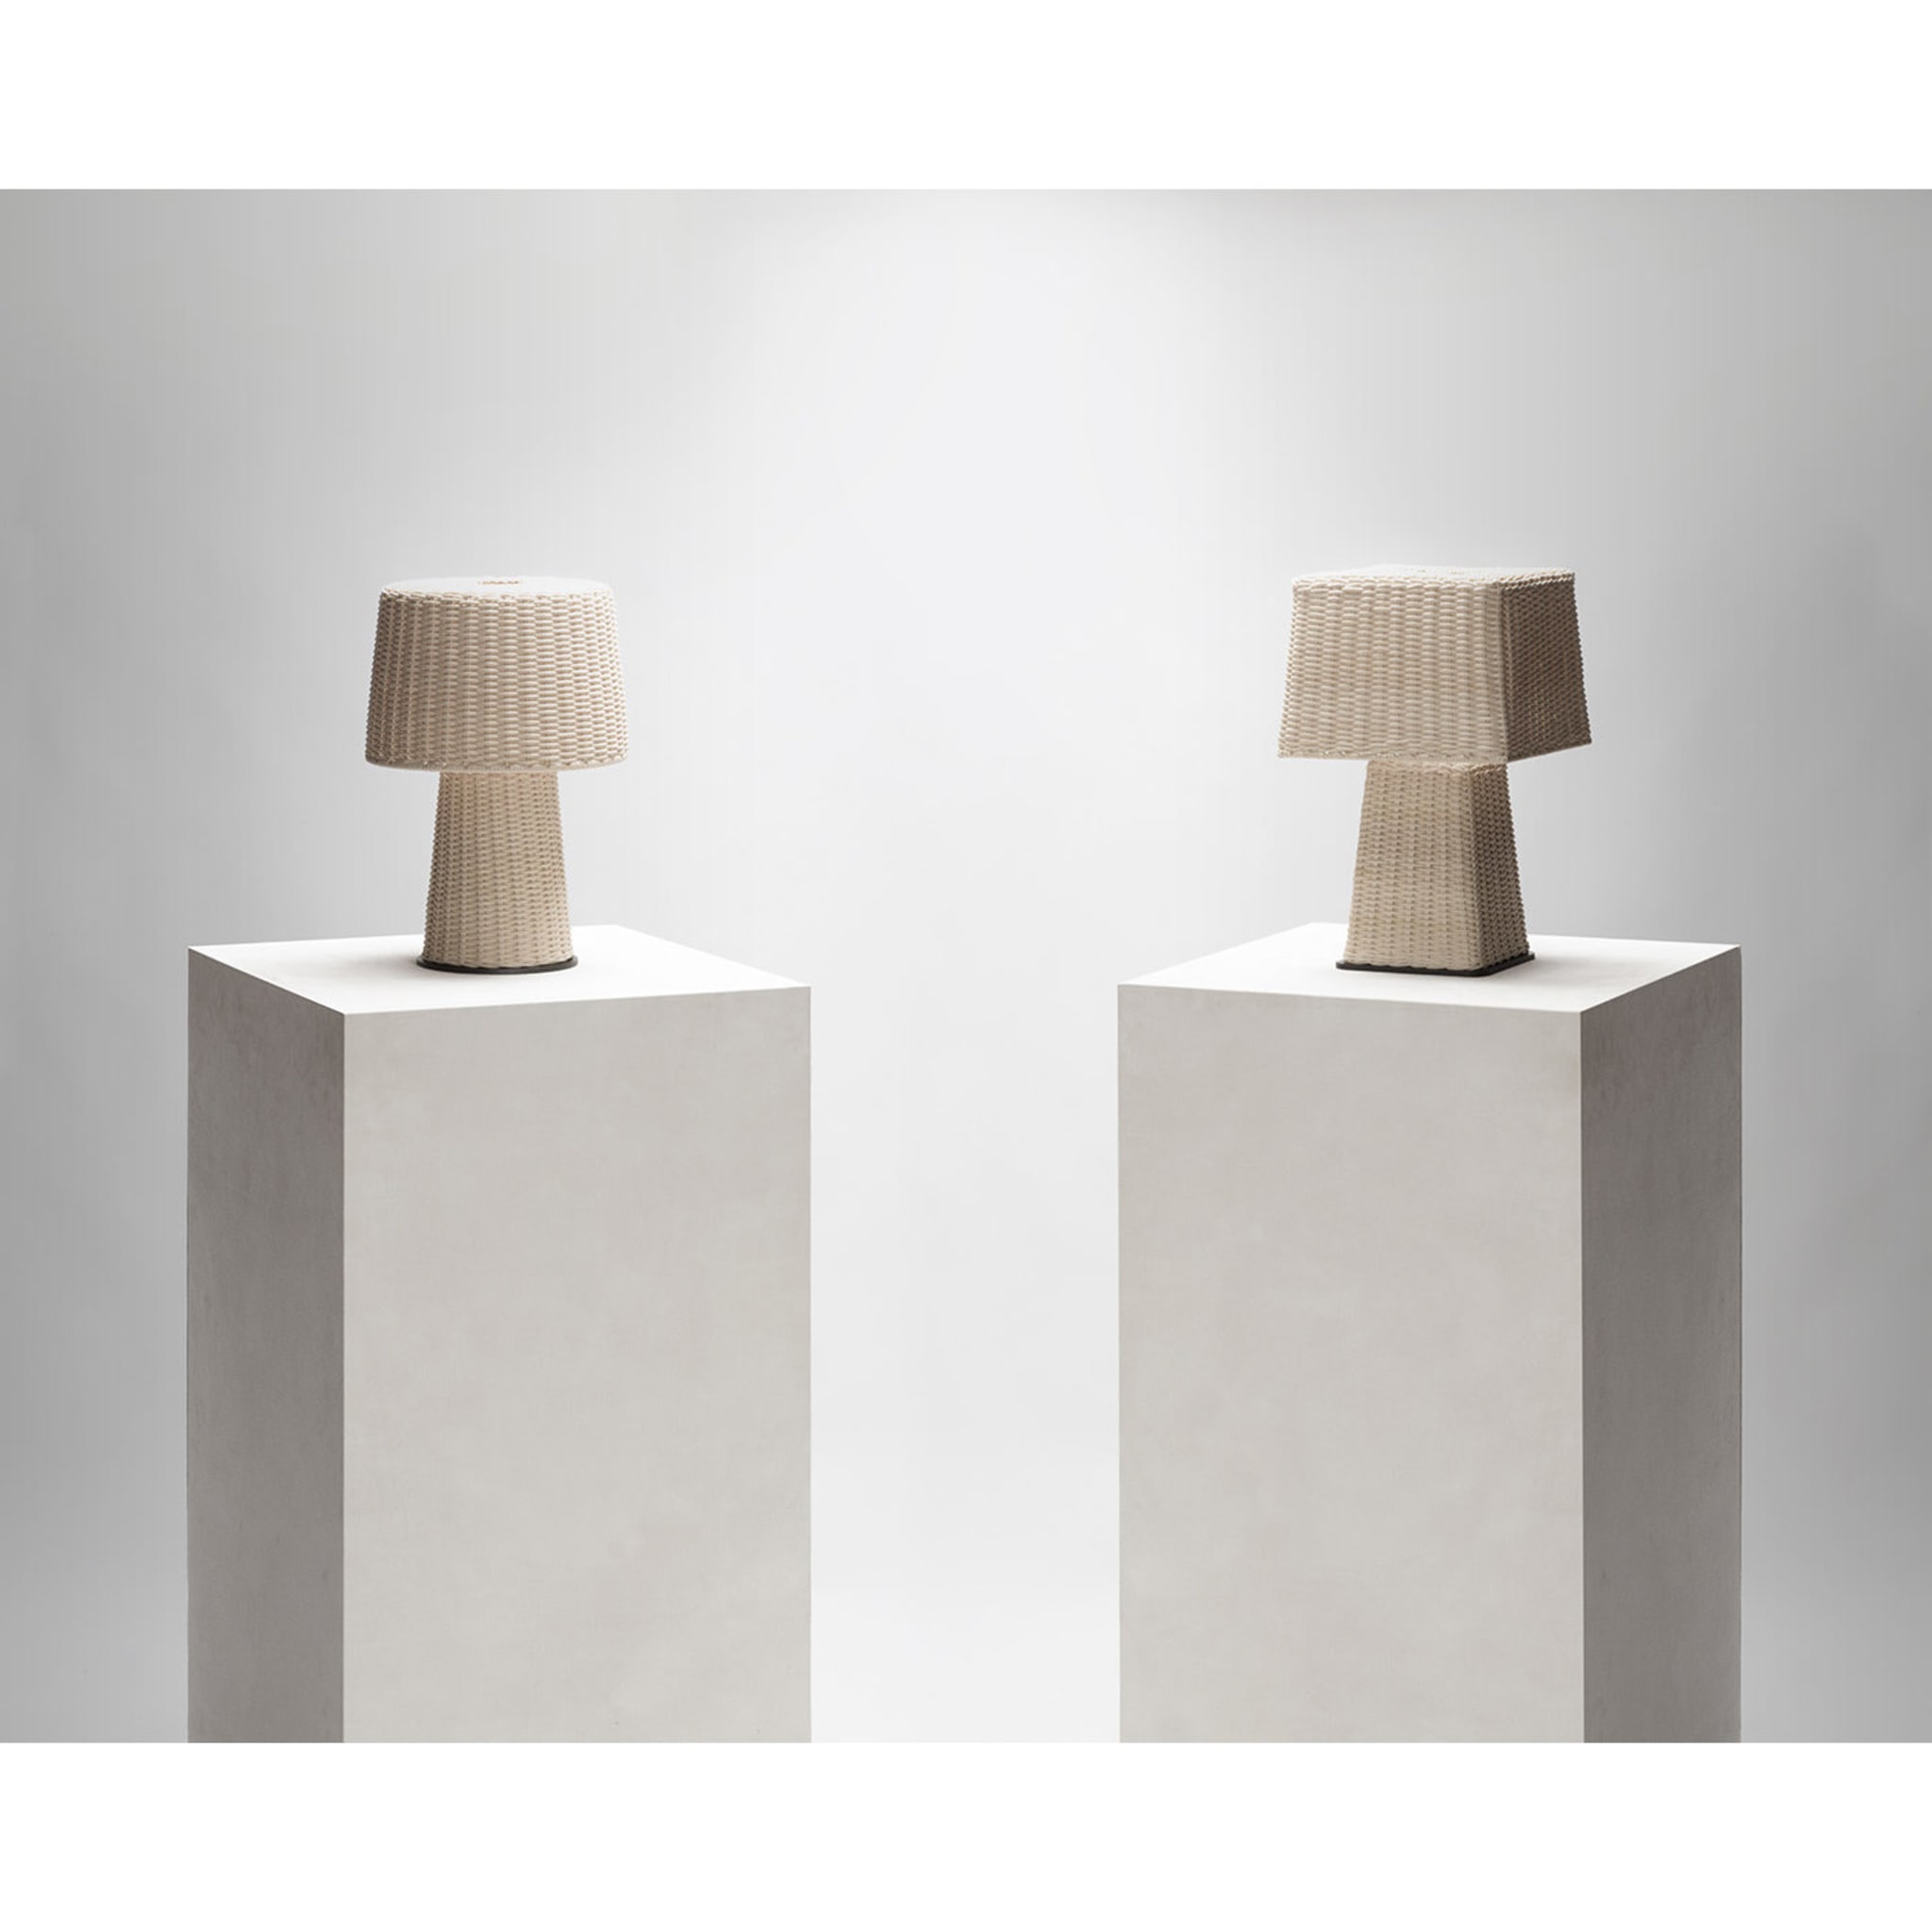 Eolie Square Table Lamp - Alternative view 1